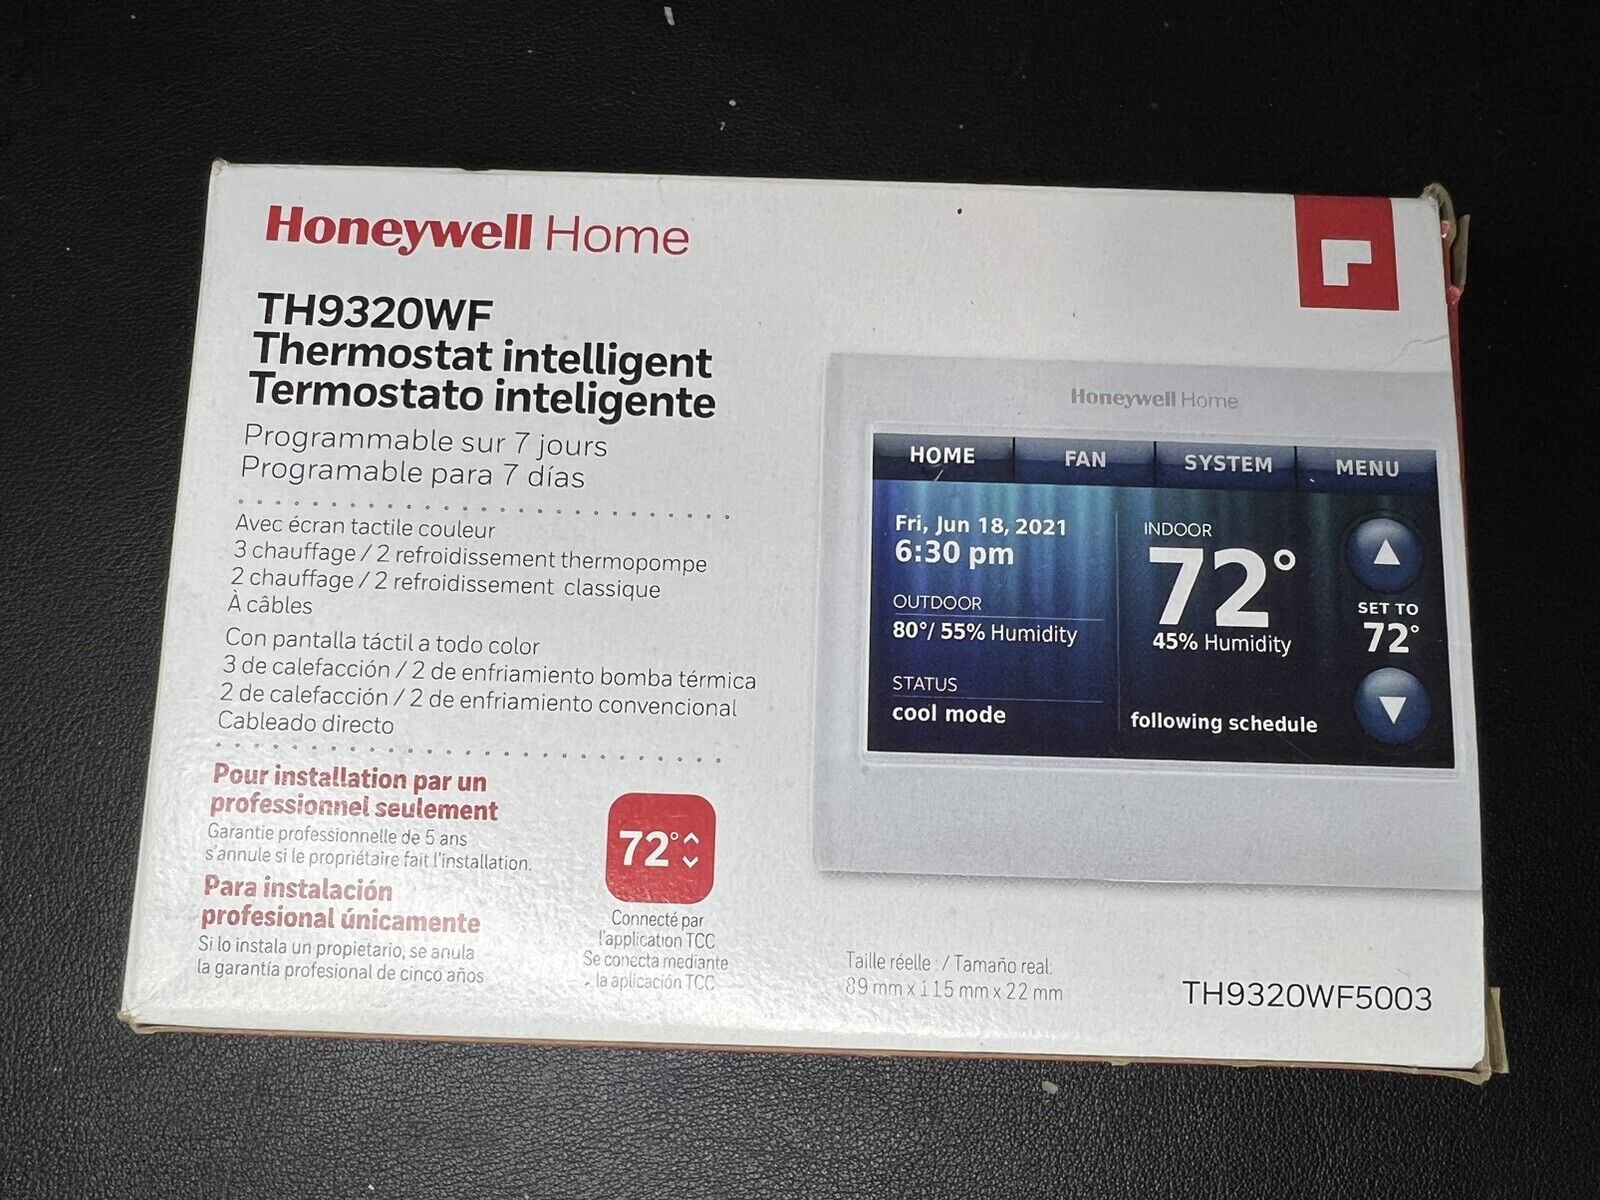 Honeywell TH9320WF5003 WiFi Color Touchscreen Thermostat - Requires C wire